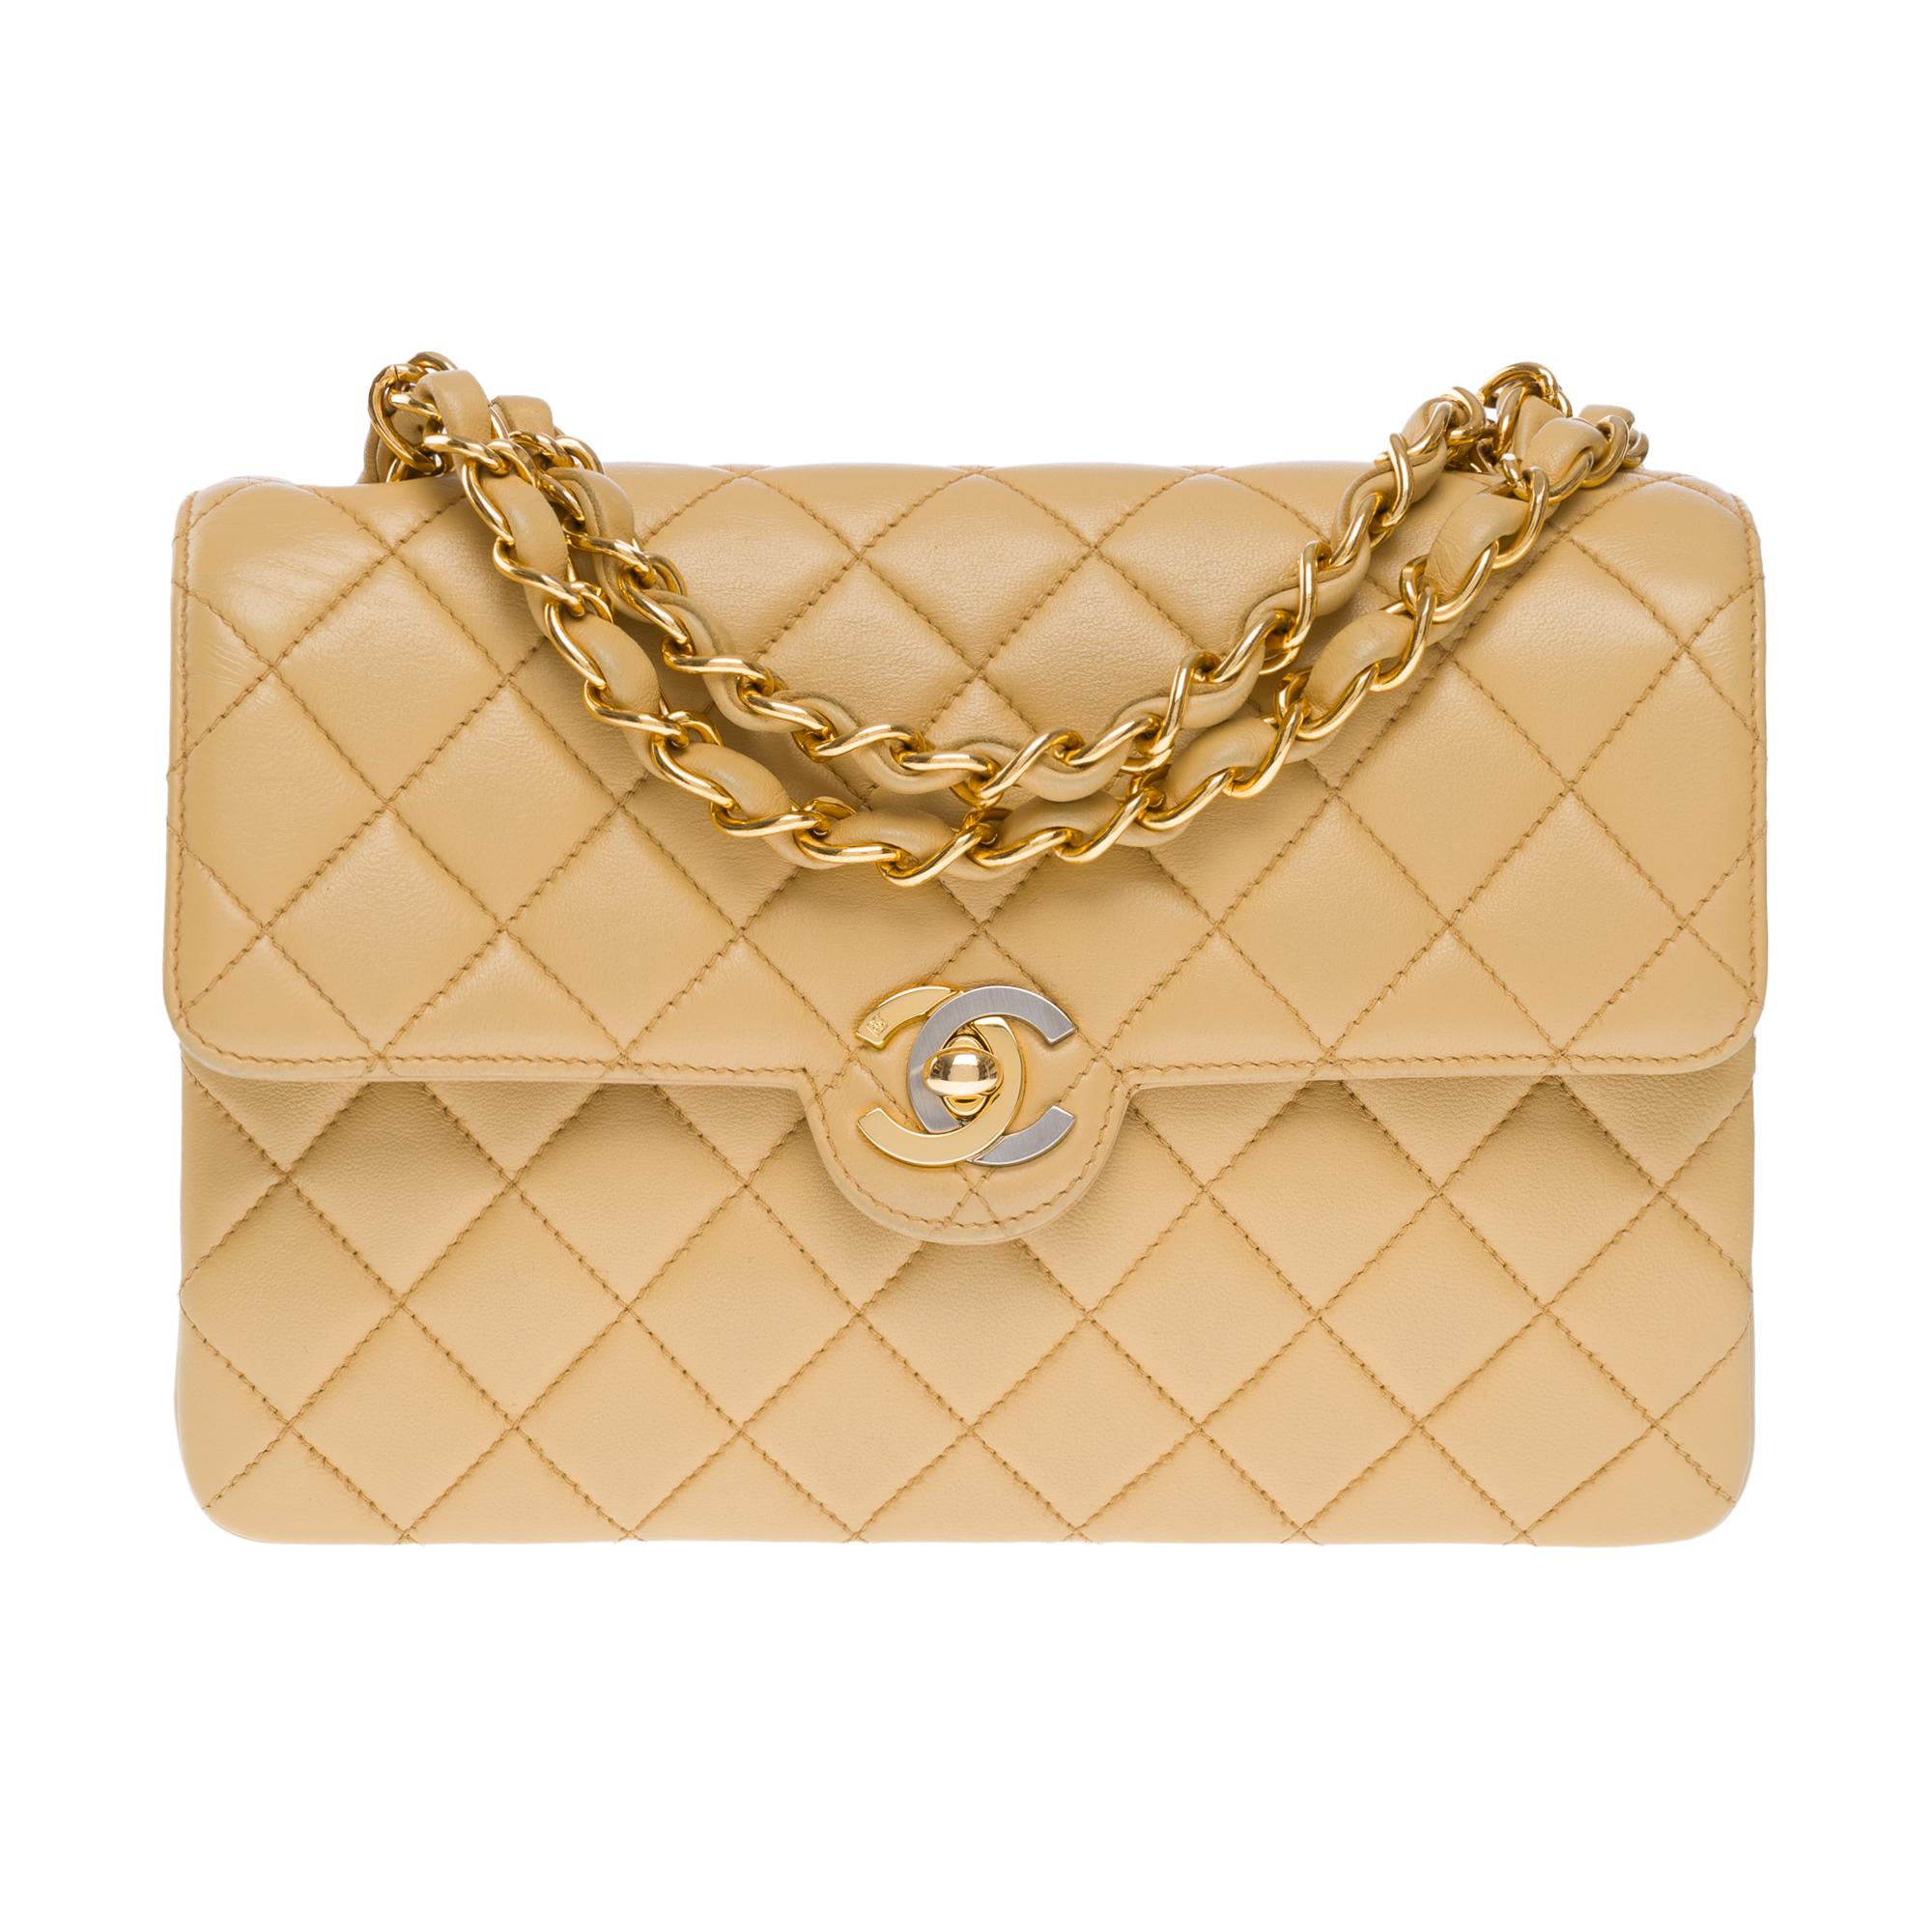 Beautiful​ ​Chanel​ ​Timeless​ ​Mini​ ​shoulder​ ​flap​ ​bag​ ​in​ ​beige​ ​quilted​ ​lambskin,​ ​shoulder​ ​strap​ ​in​ ​golden​ ​metal​ ​interlaced​ ​with​ ​beige​ ​lambskin​ ​leather​ ​for​ ​a​ ​hand​ ​or​ ​shoulder​ ​or​ ​crossbody​